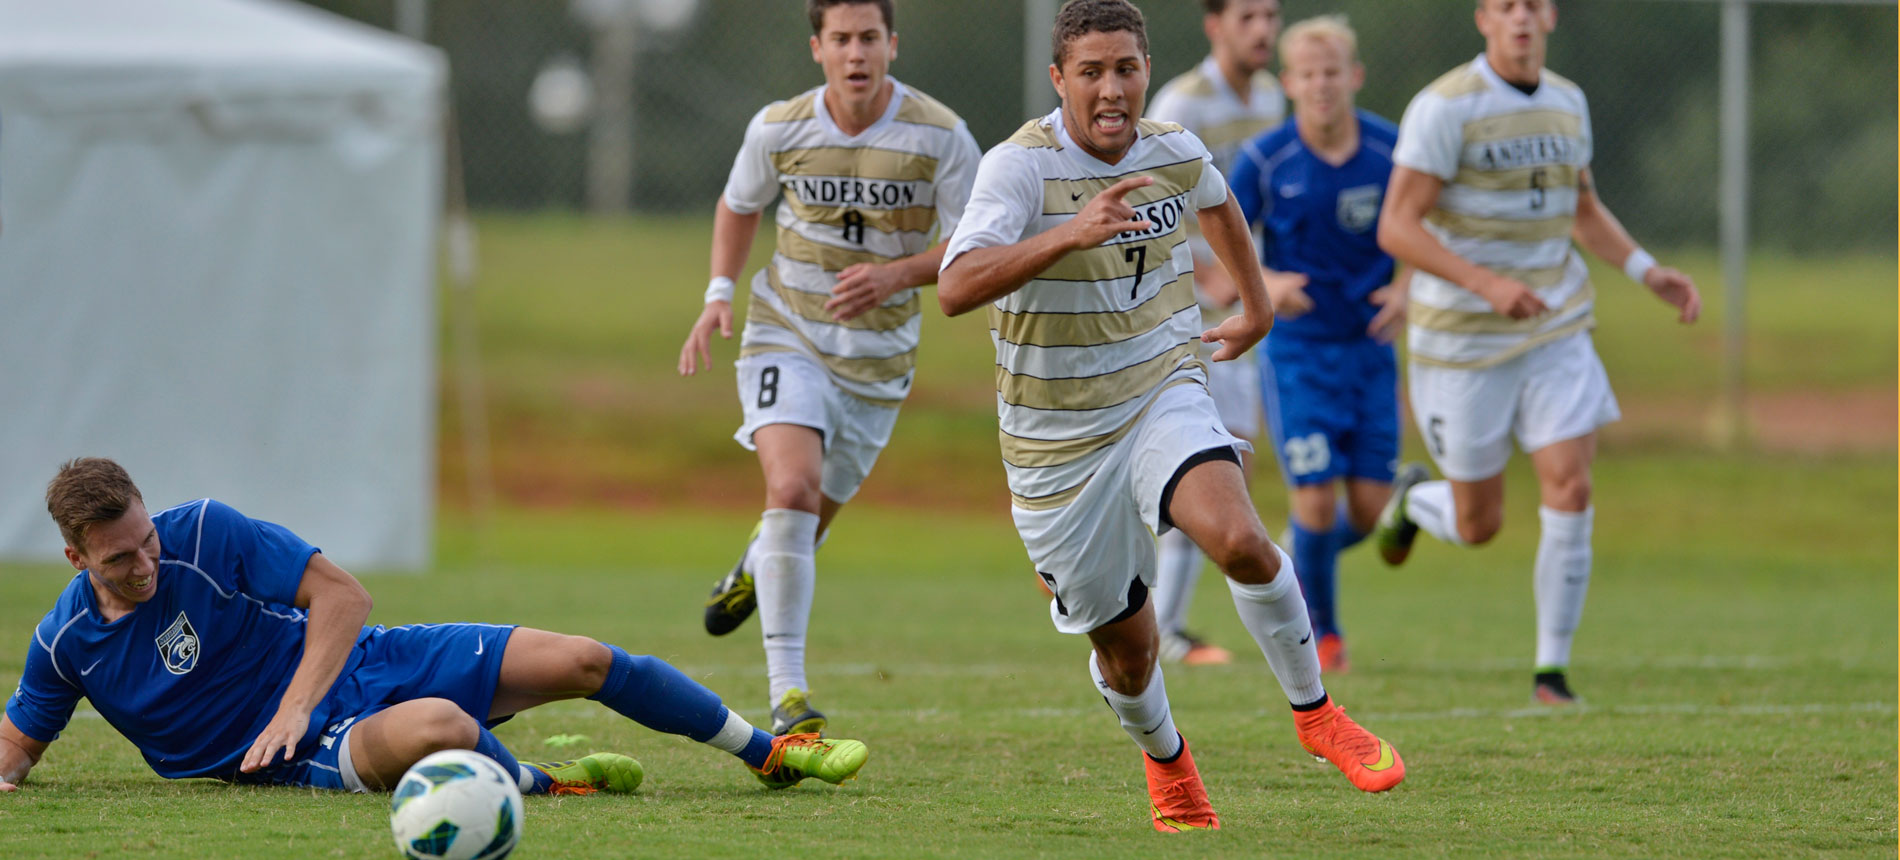 Men’s Soccer Defeats Flagler to Move to 2-0